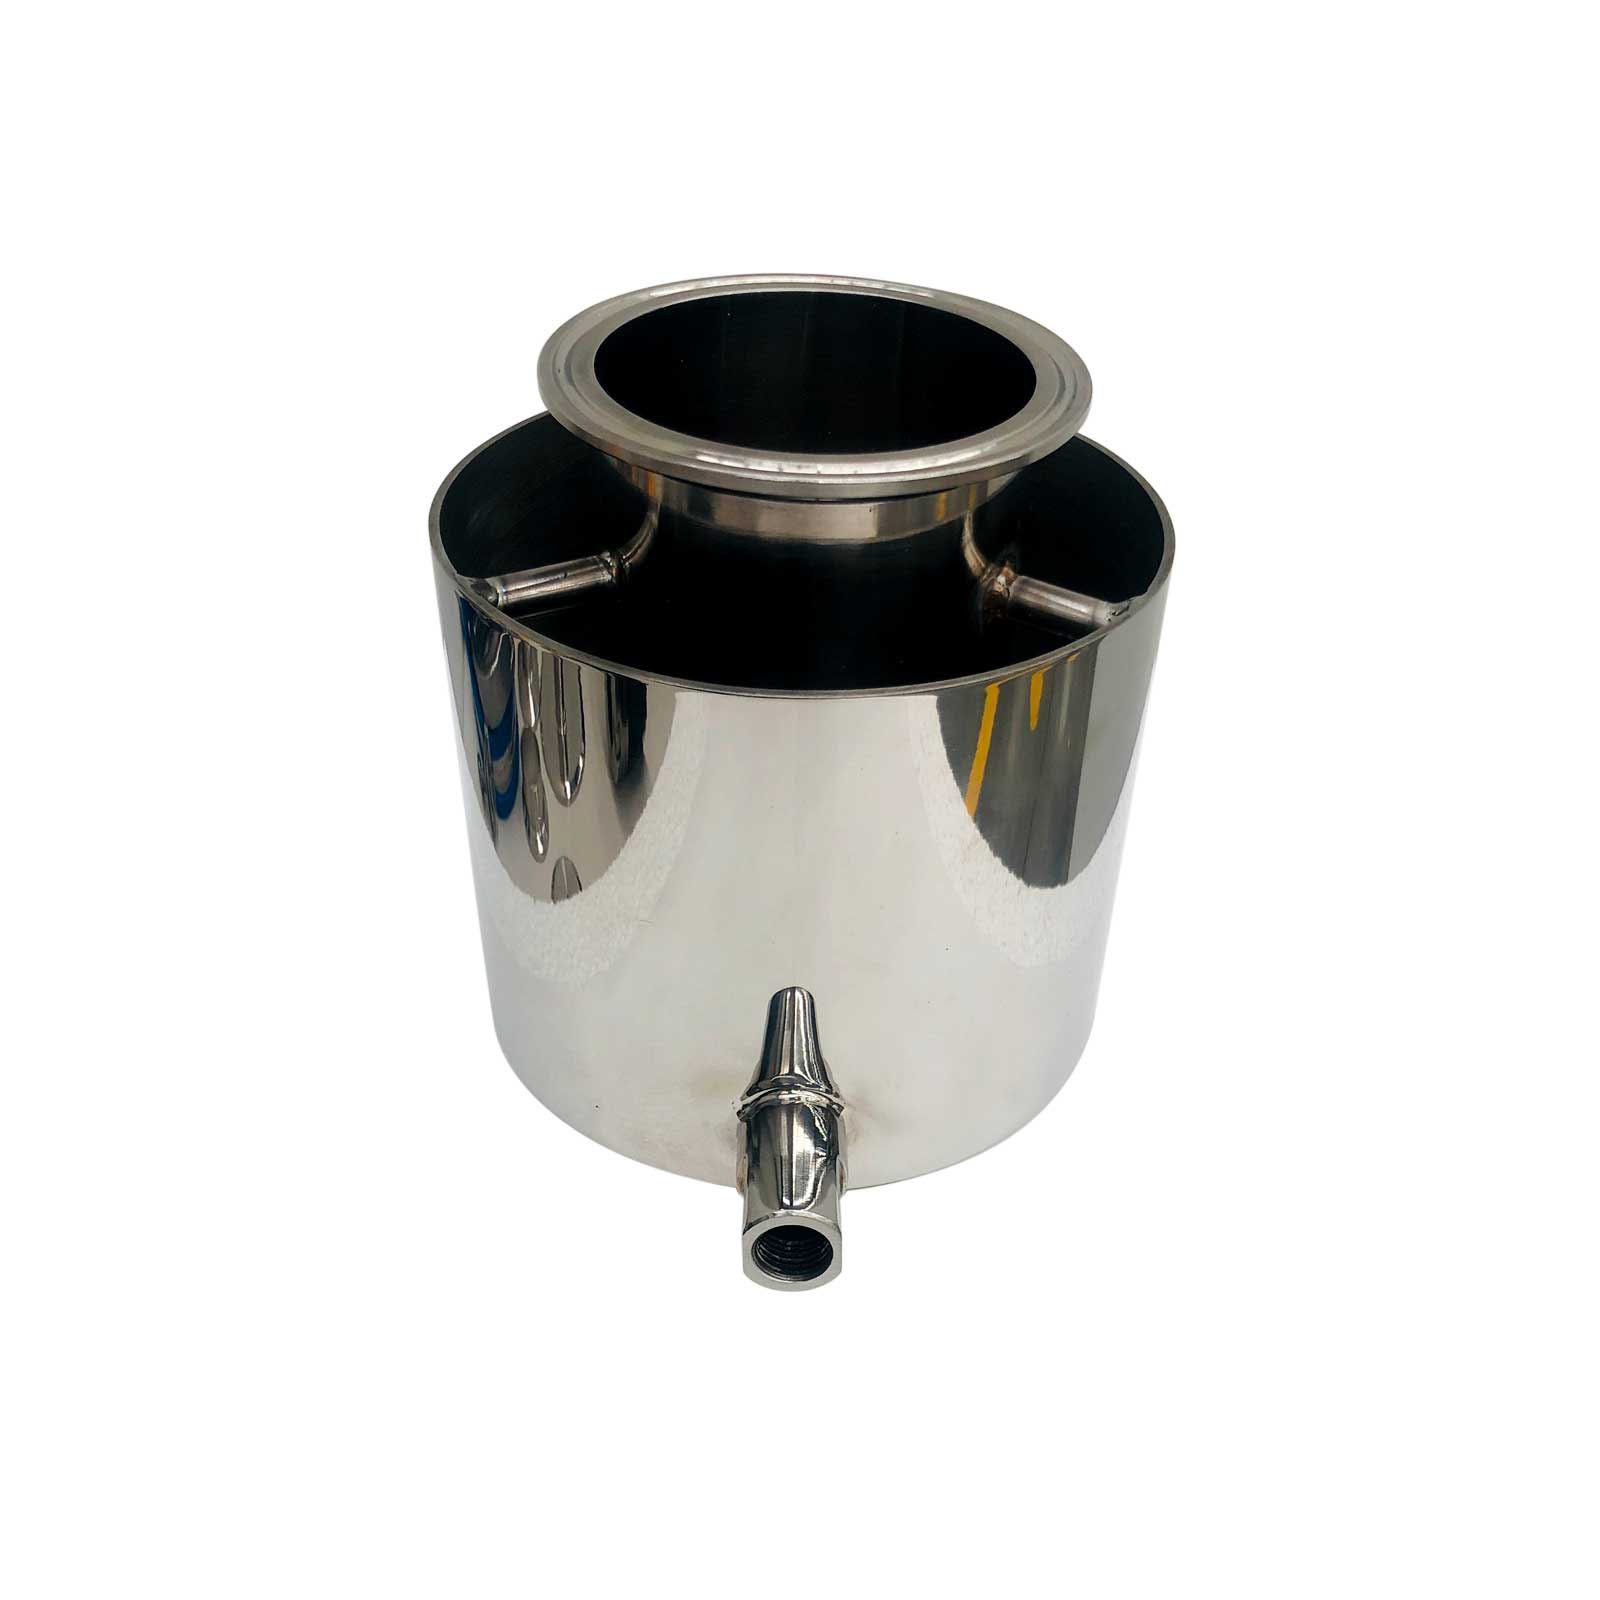 180 g Stainless Steel (De-Wax with Drain plug) Material Column